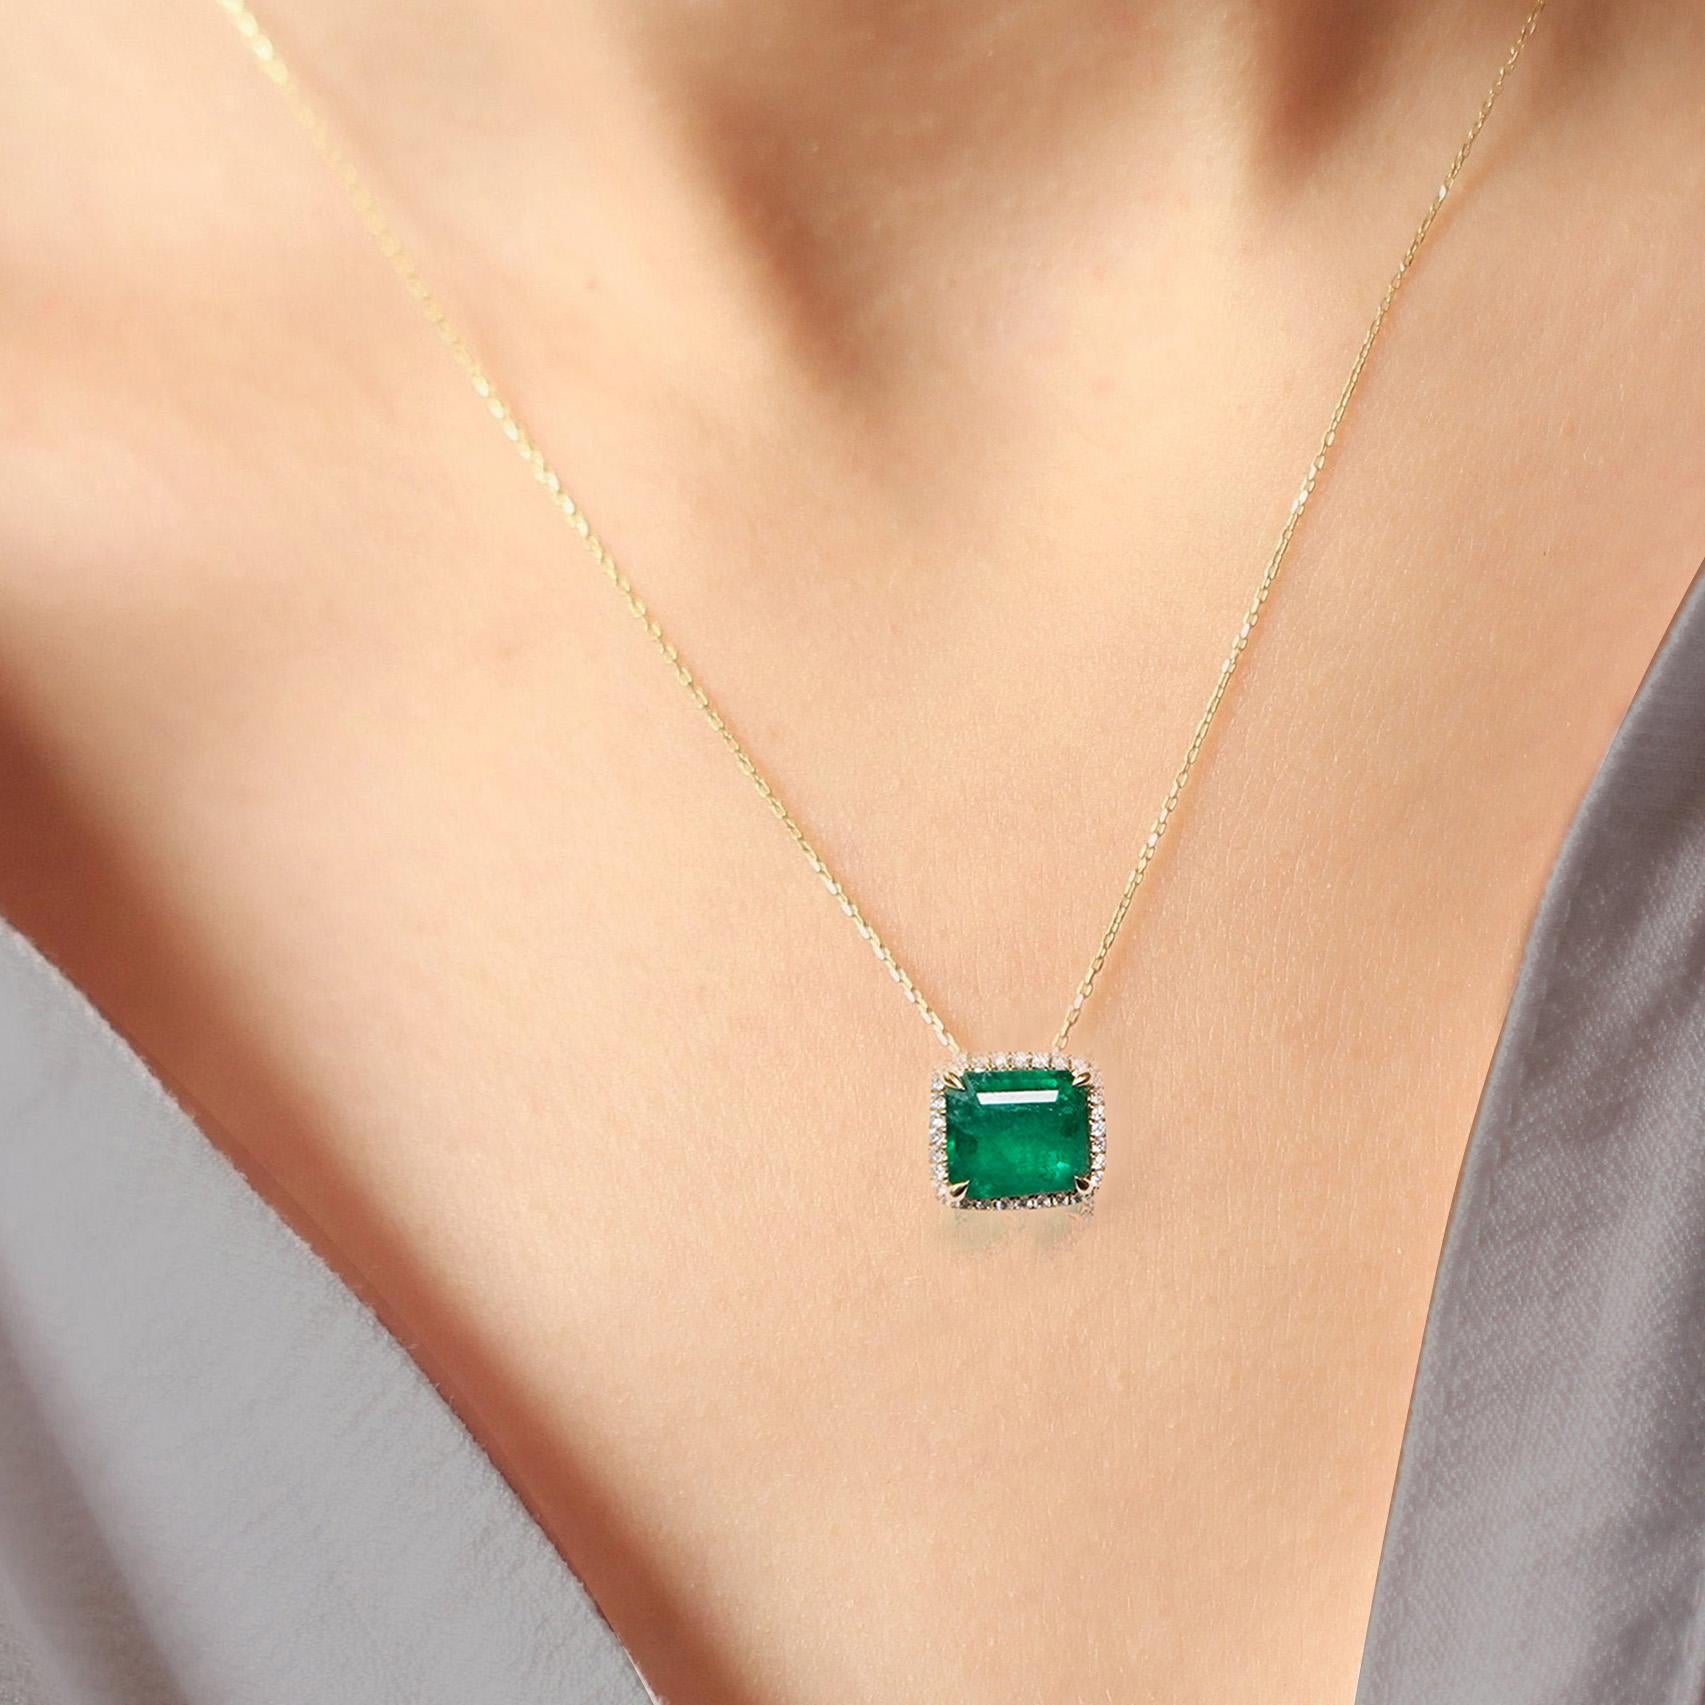 Octagon Cut 18K Yellow Gold Necklace With Emerald 3.46 ct. For Sale